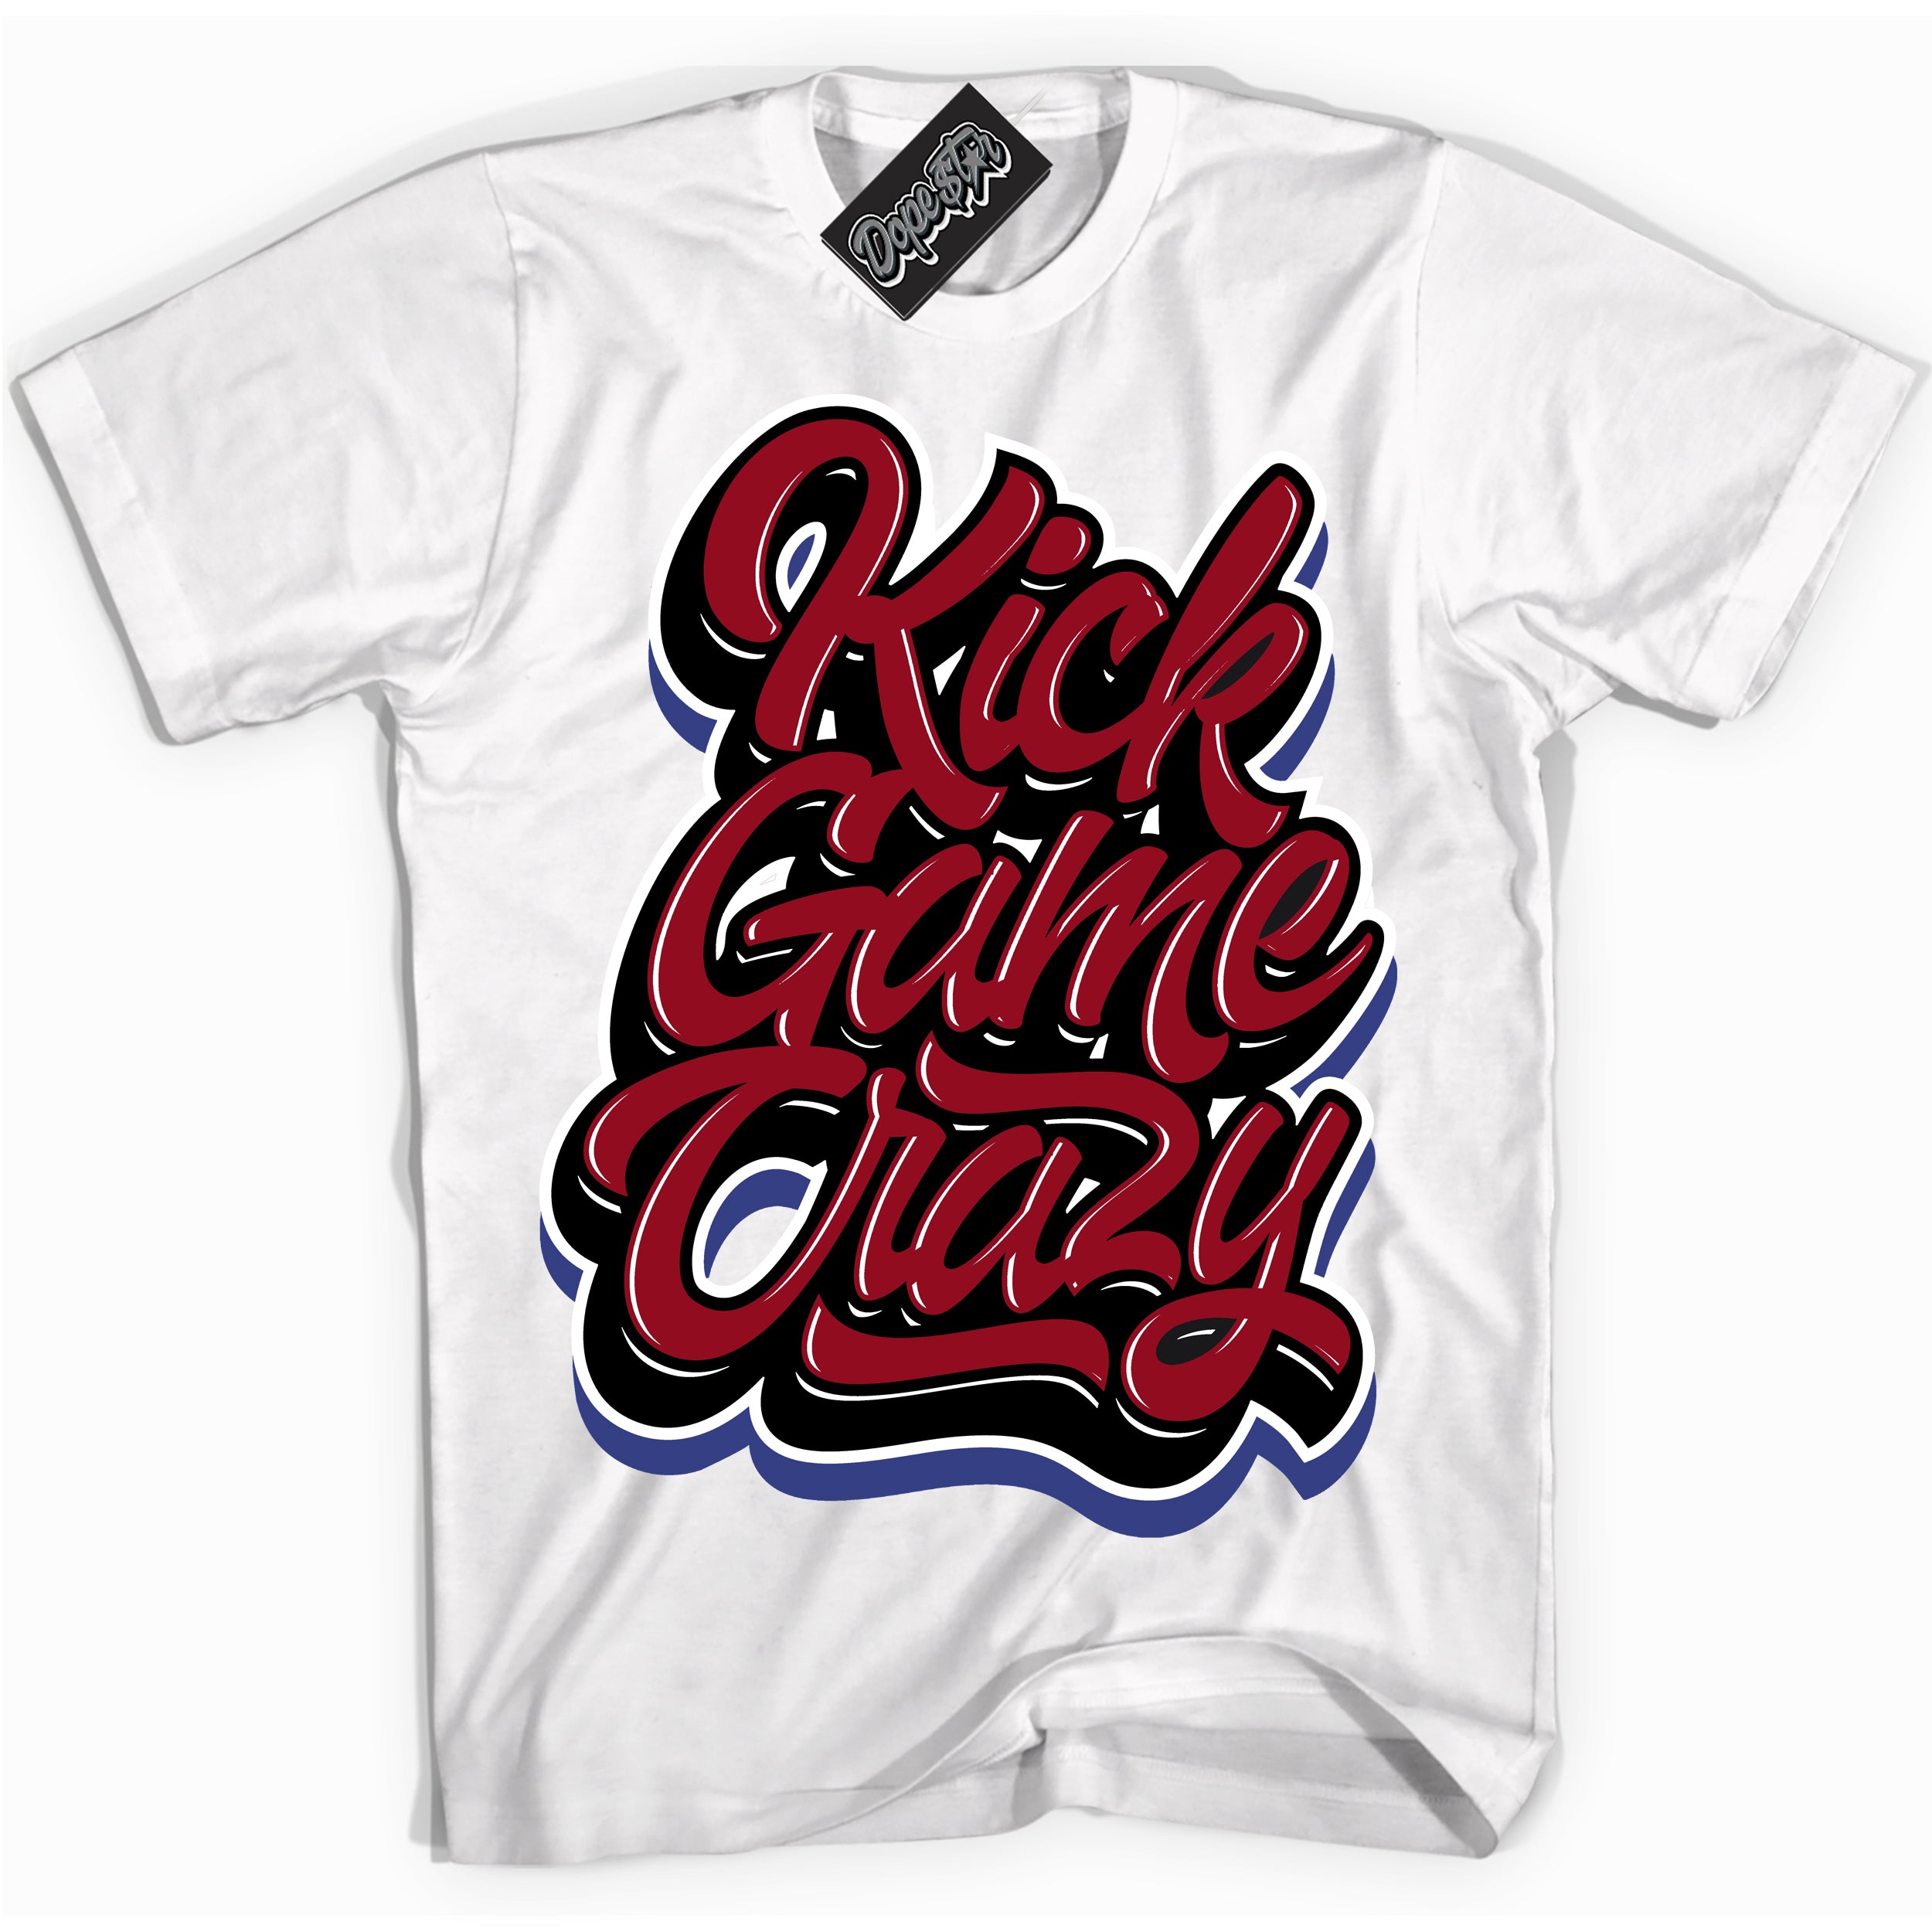 Cool White Shirt with “ Kick Game Crazy ” design that perfectly matches Playoffs 8s Sneakers.